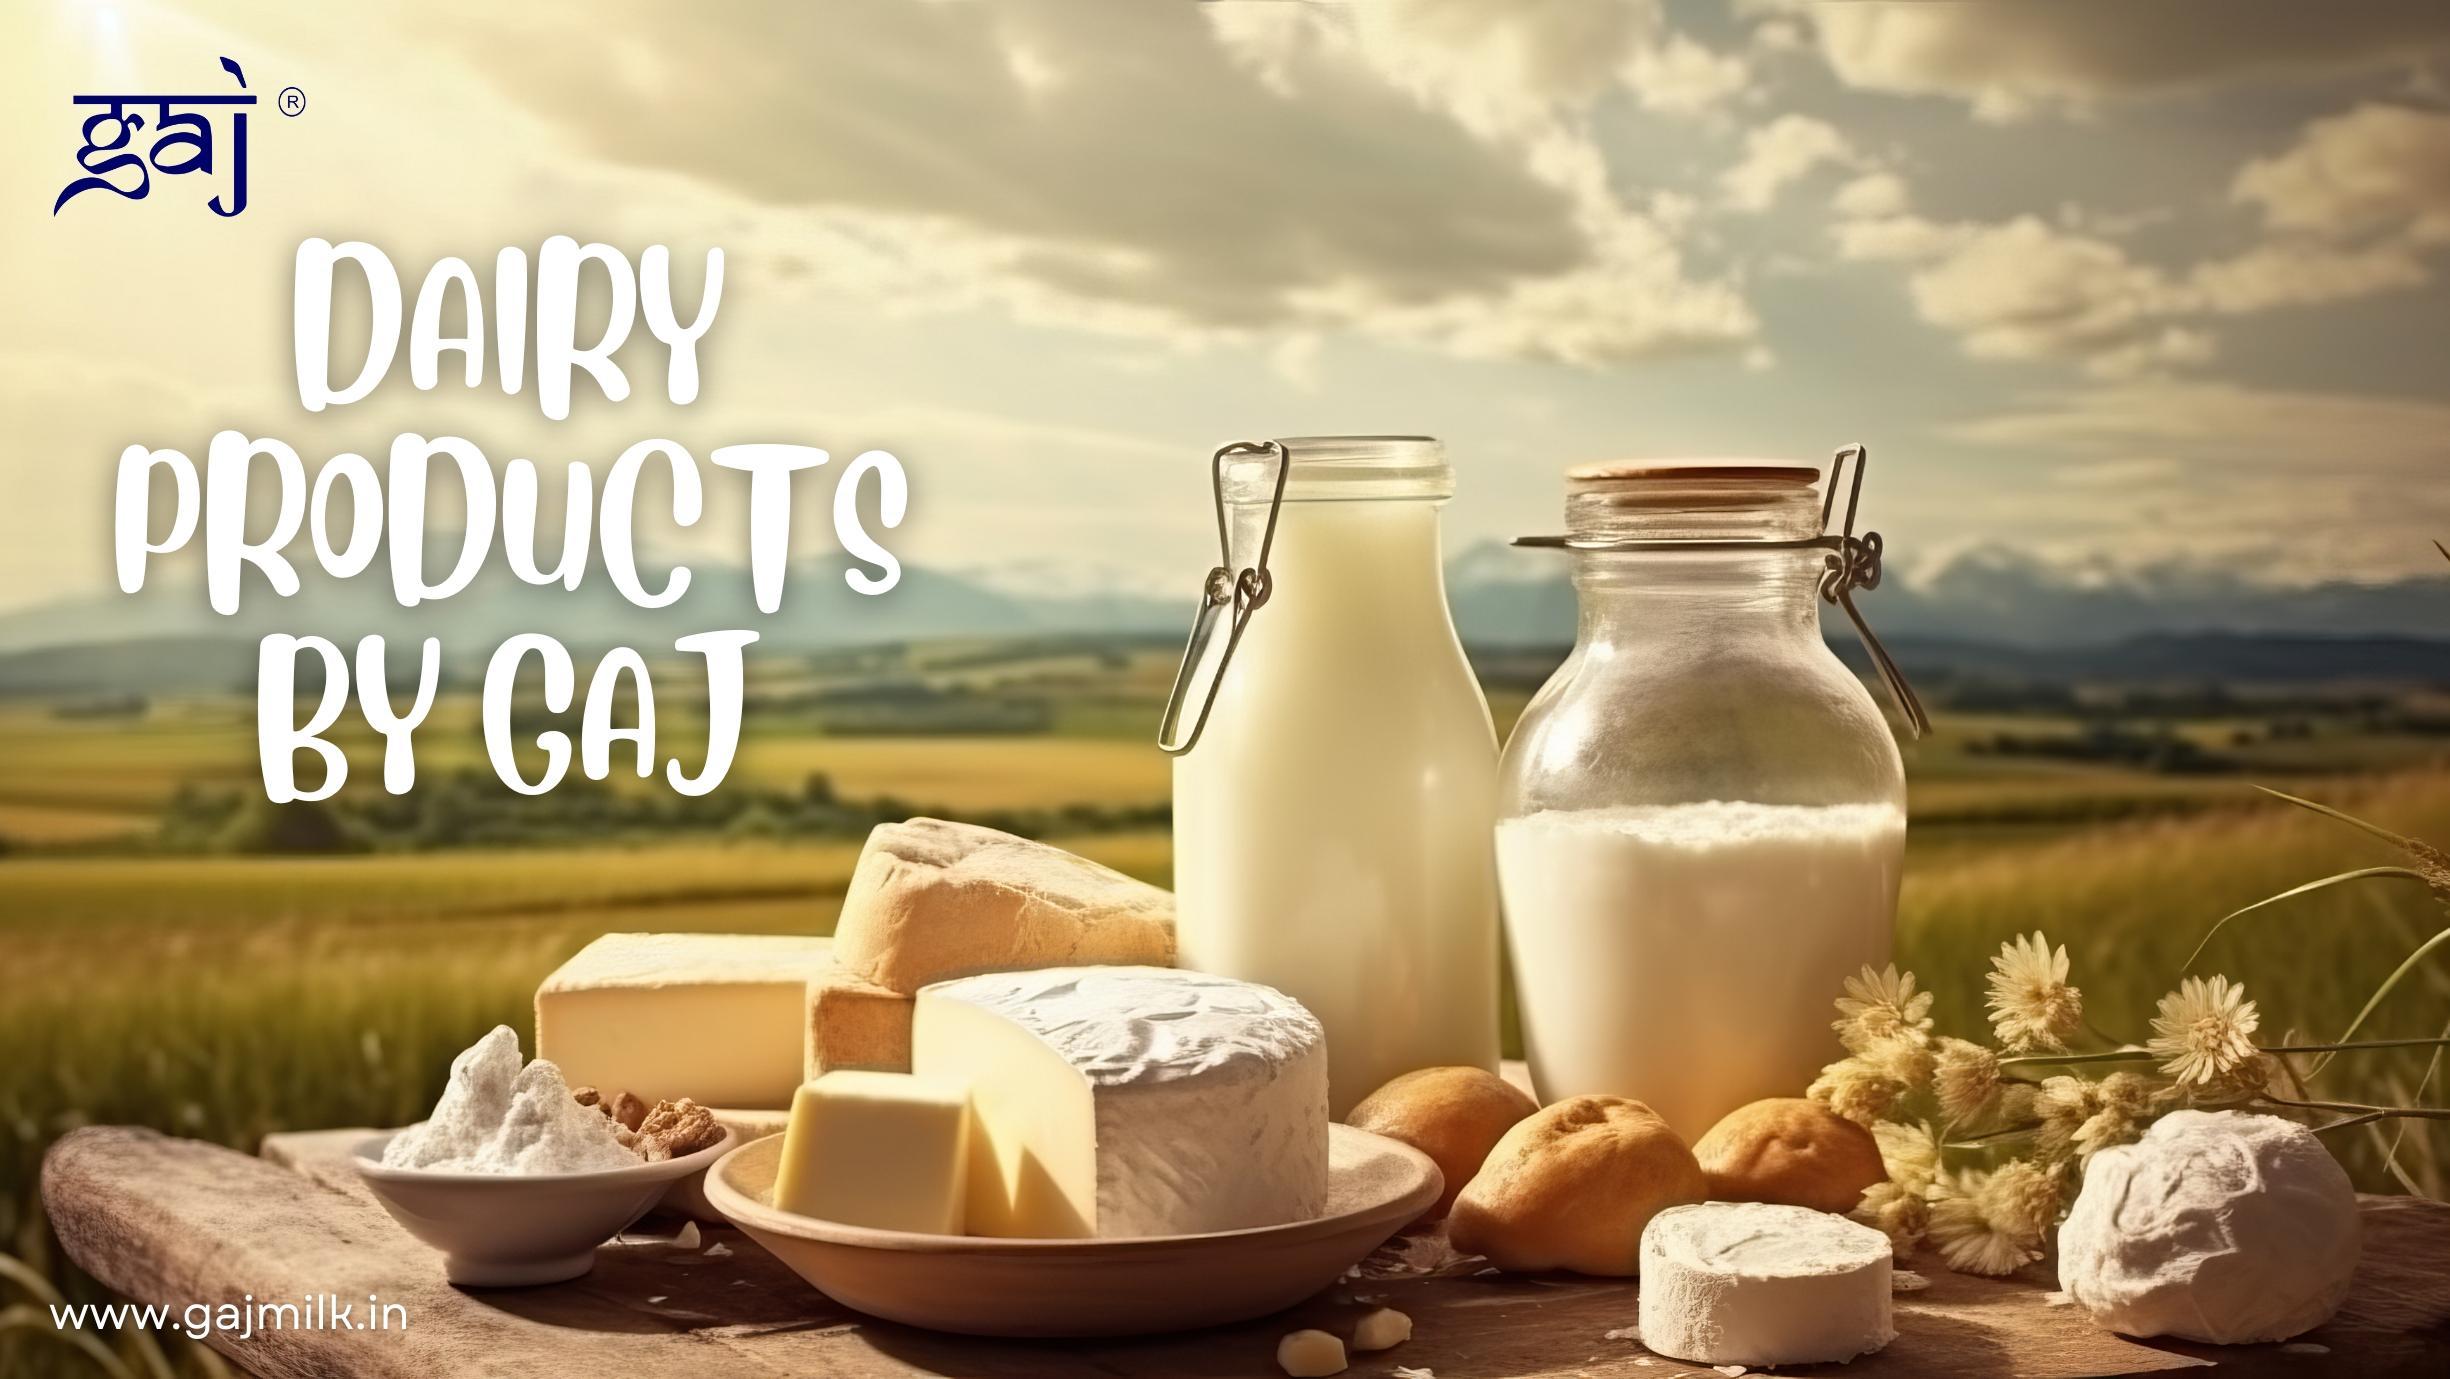 Guide to Dairy Products